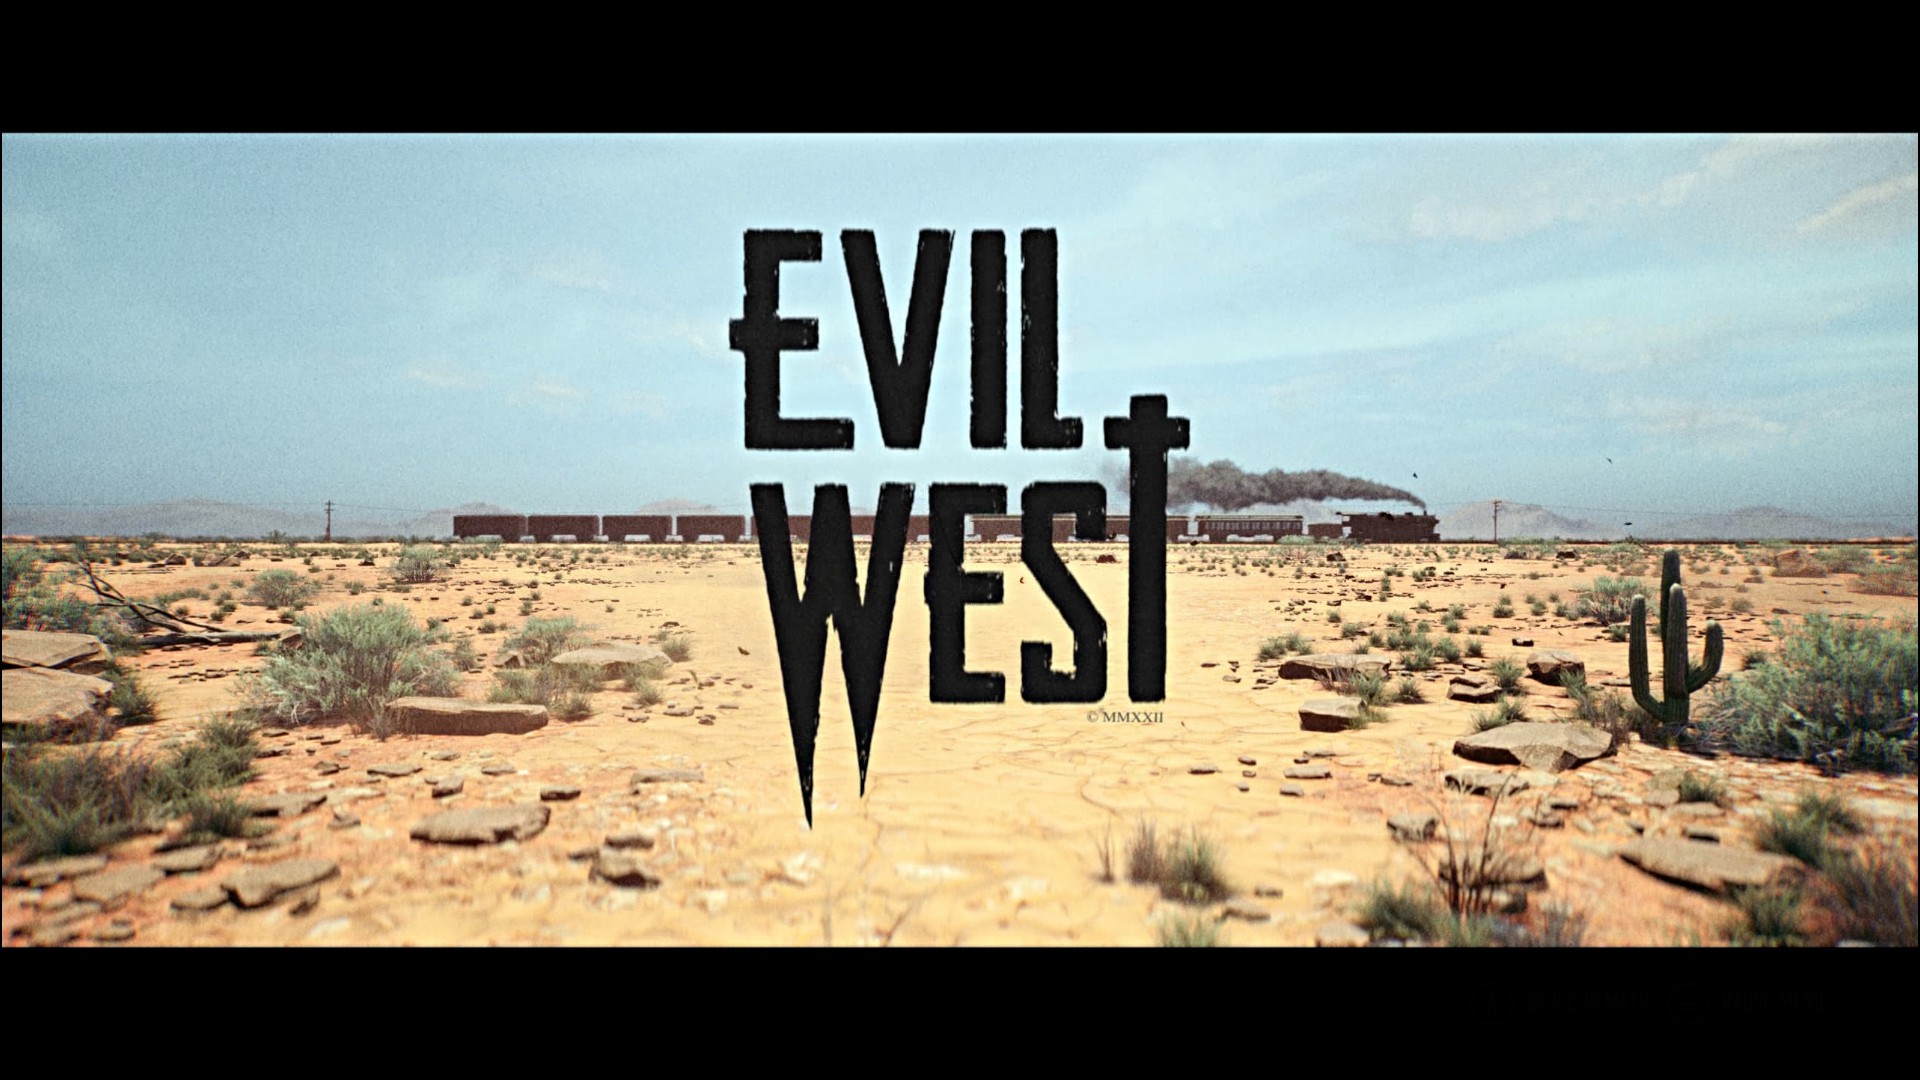 Evil West Review – Bloody Fun That Feels Like The Old West